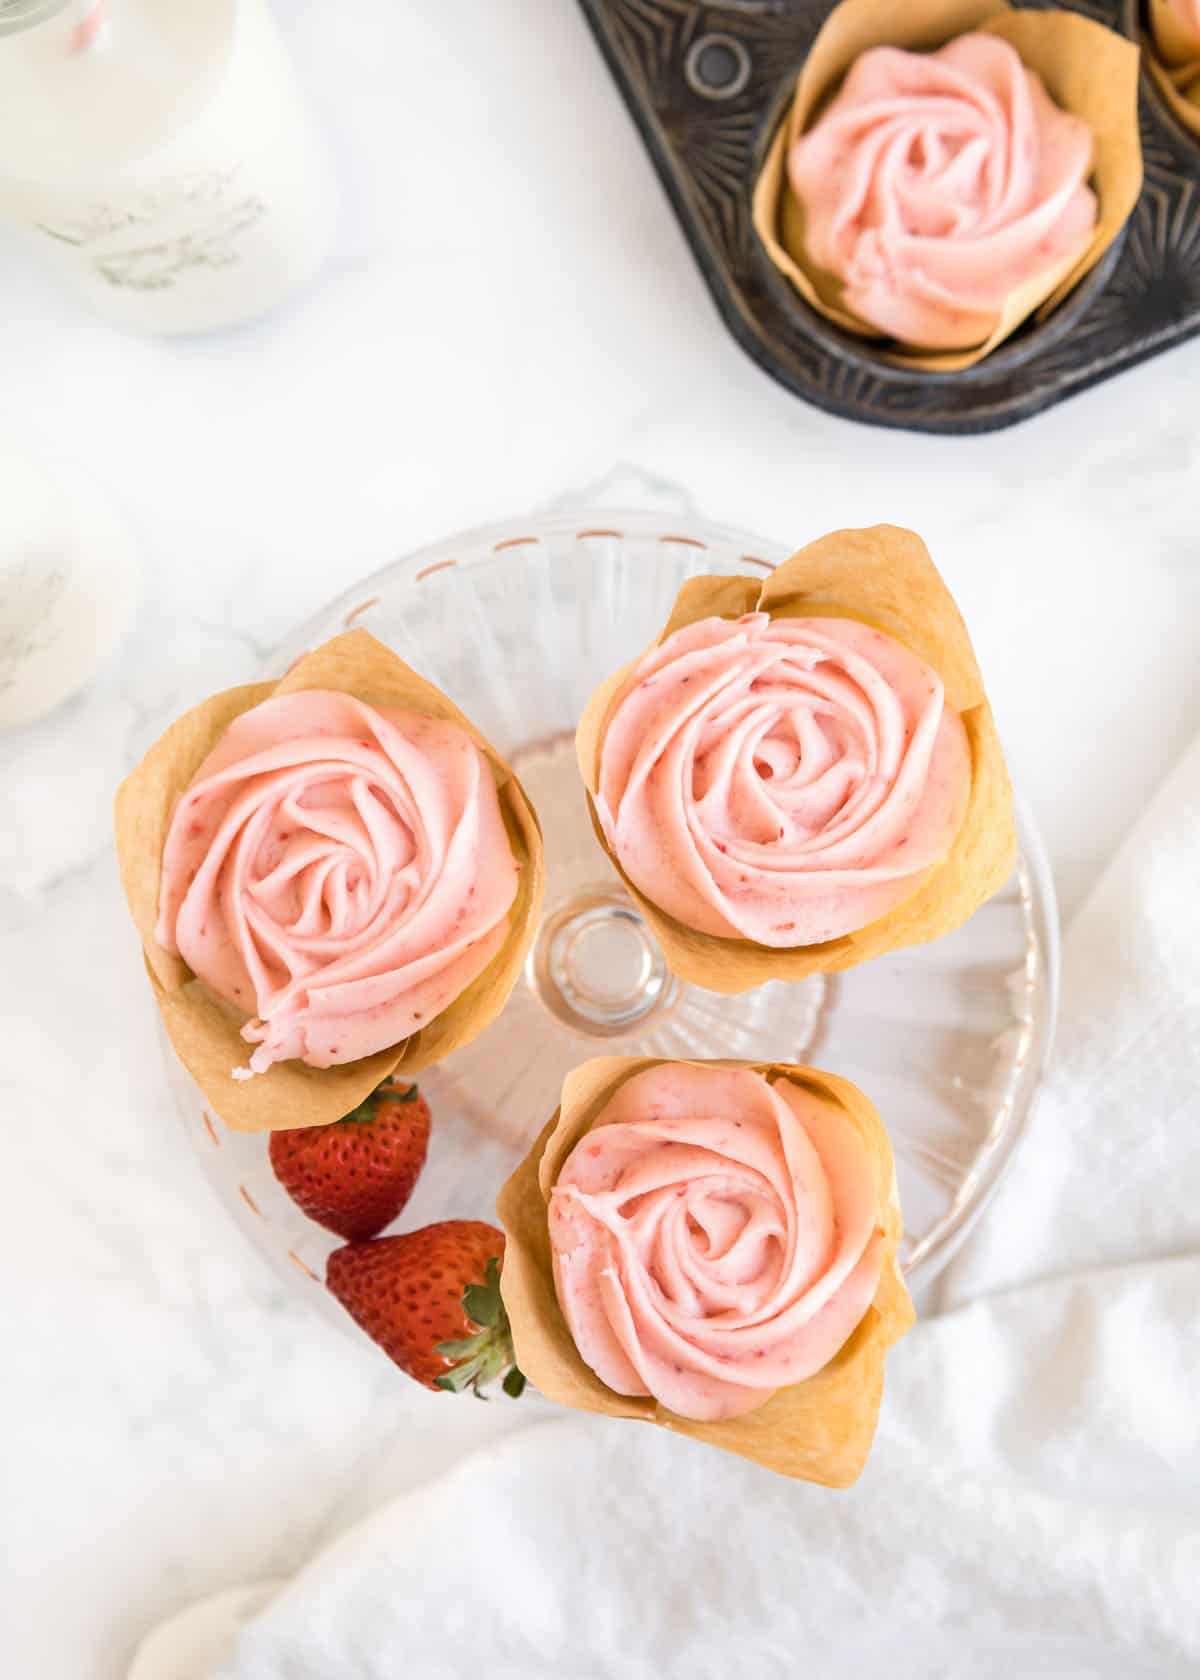 Overhead shot of three strawberry buttercream cupcakes and two whole strawberries on a small, glass cake stand. The top left and right corners are accented by a glass of milk and a cupcake in it's parchment liner in the muffin tin.